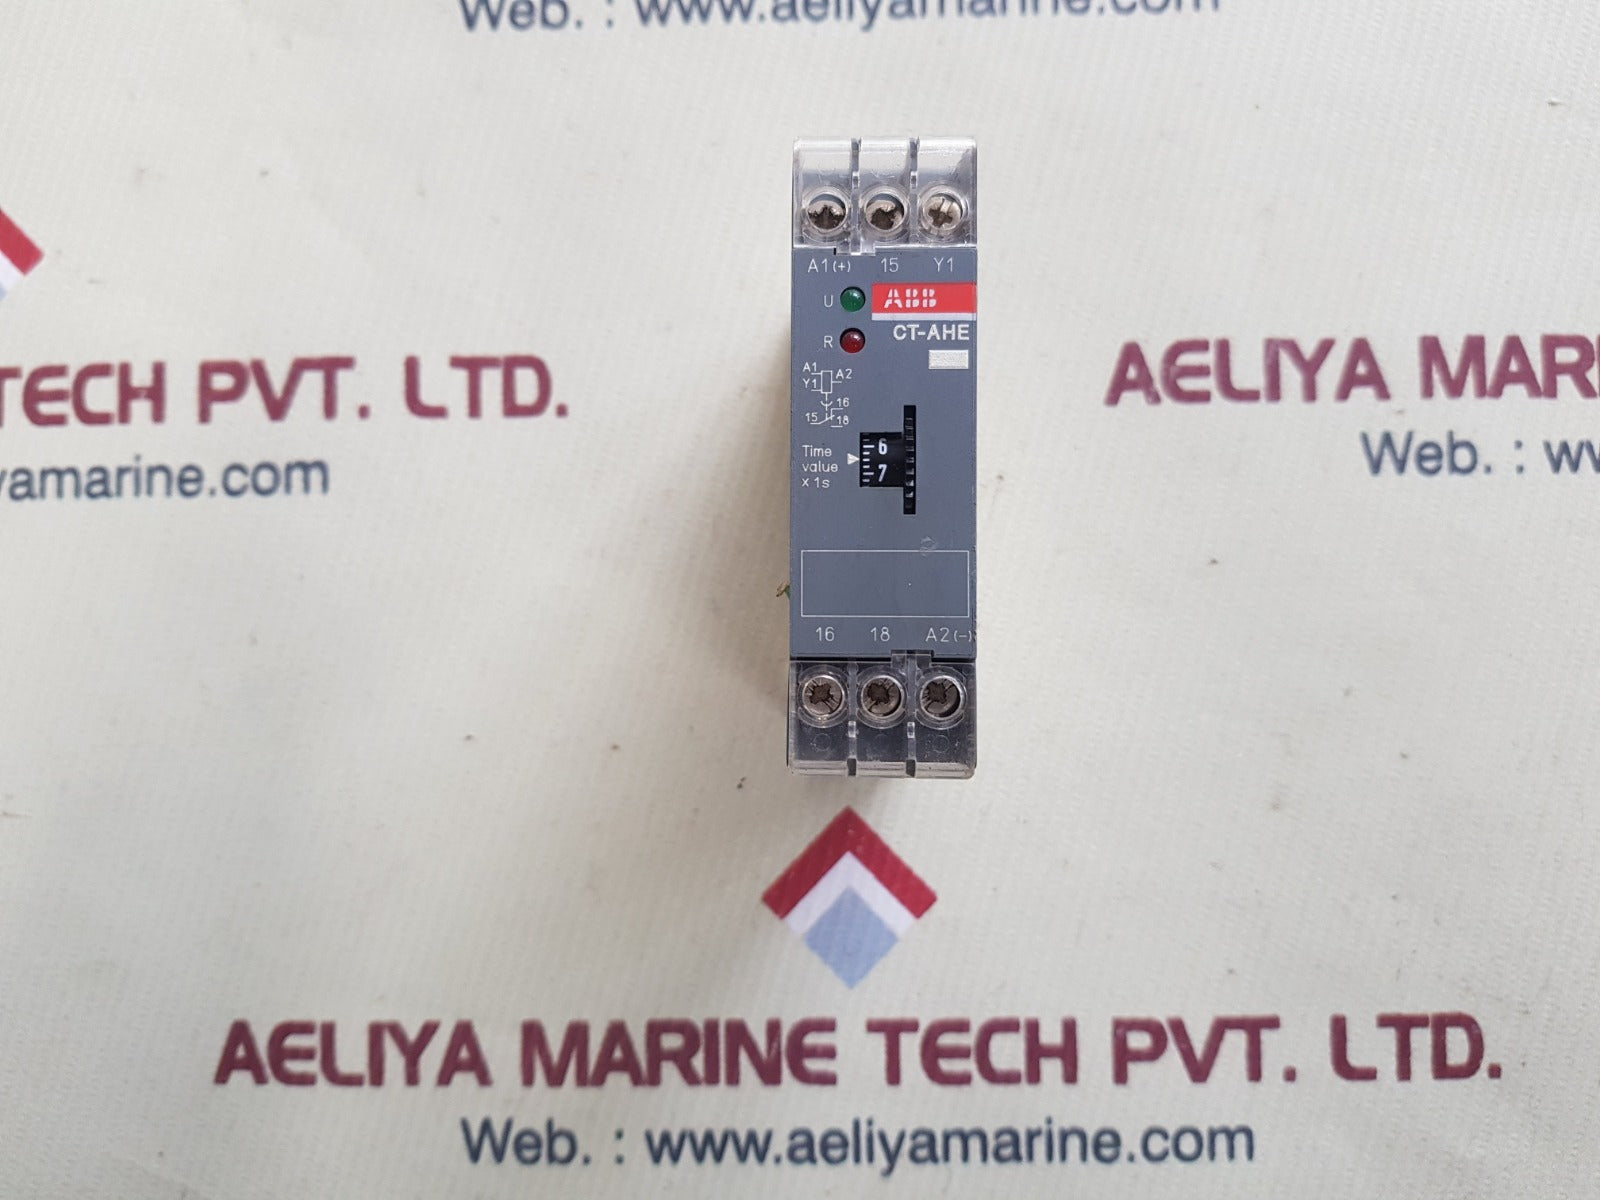 Abb off delay with auxiliary supply time relay